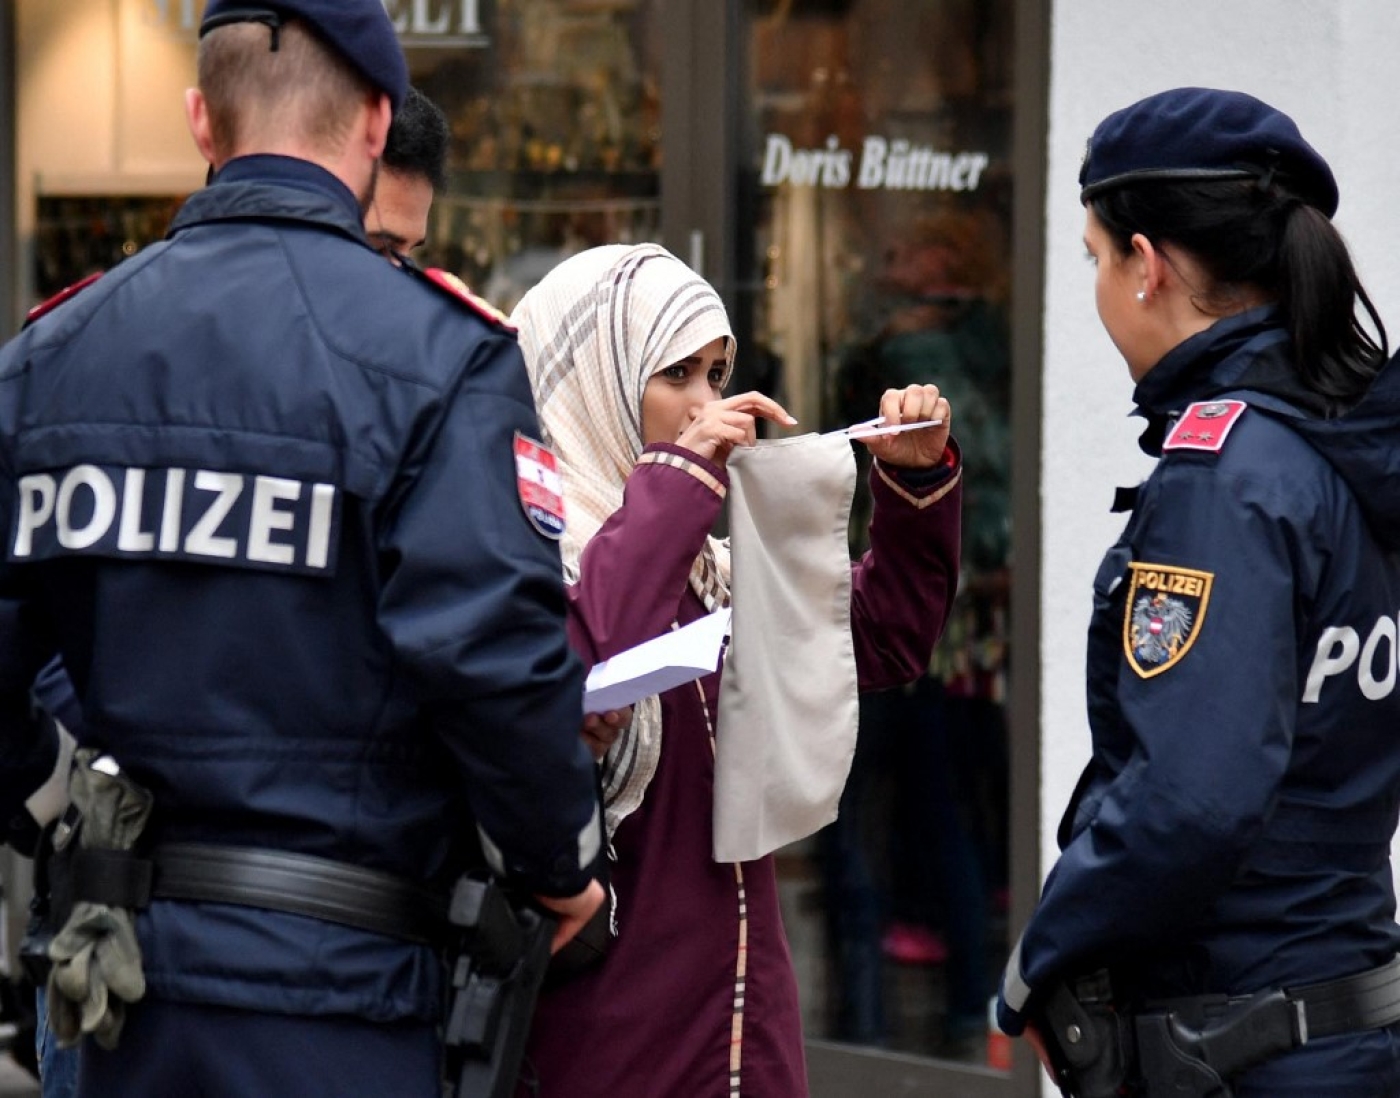 Police officers ask a woman to unveil her face in Zell am See, Austria, on 1 October 2017, following the country's ban on full-face Islamic veils coming into force (AFP)